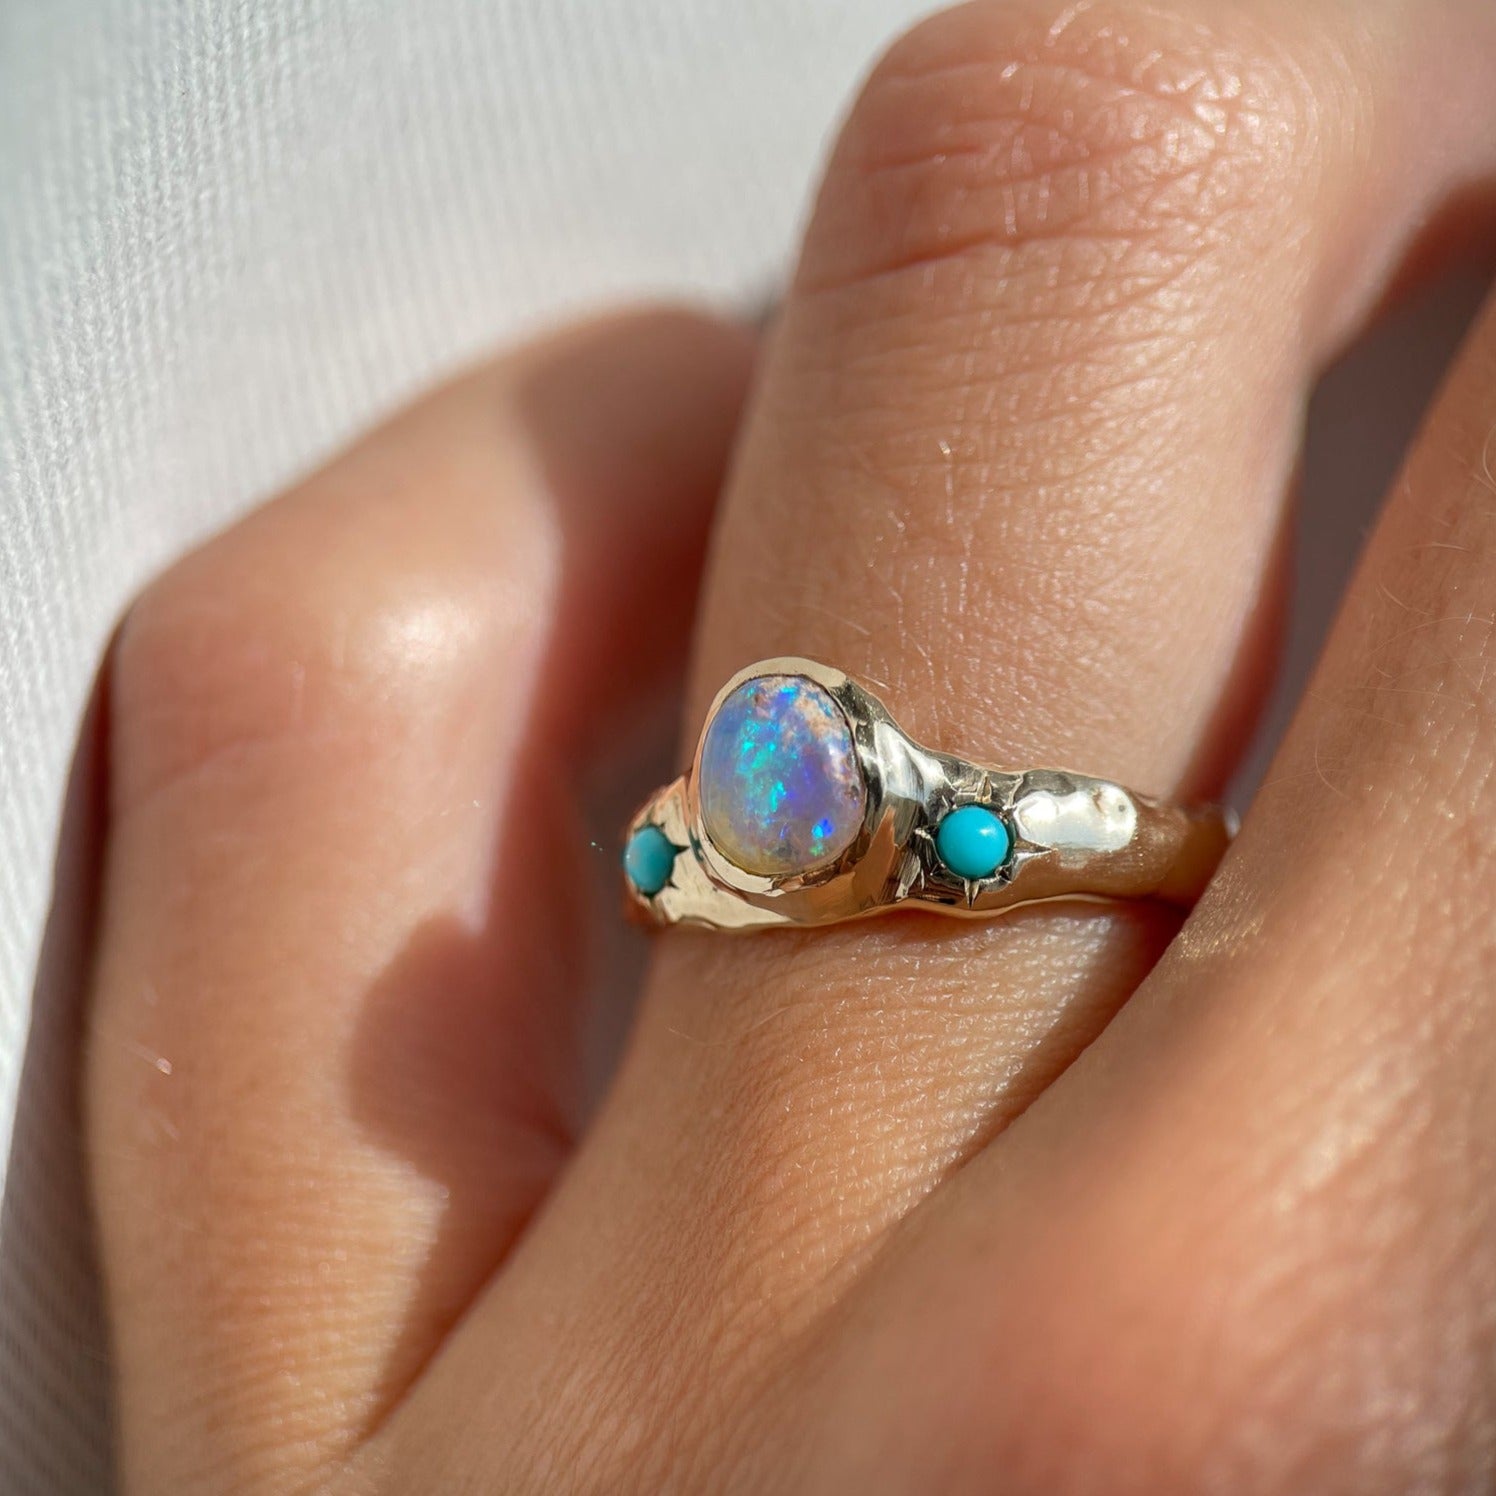 side view of a wide gold band with a center opal and turquoise star settings is worn on a ring finger